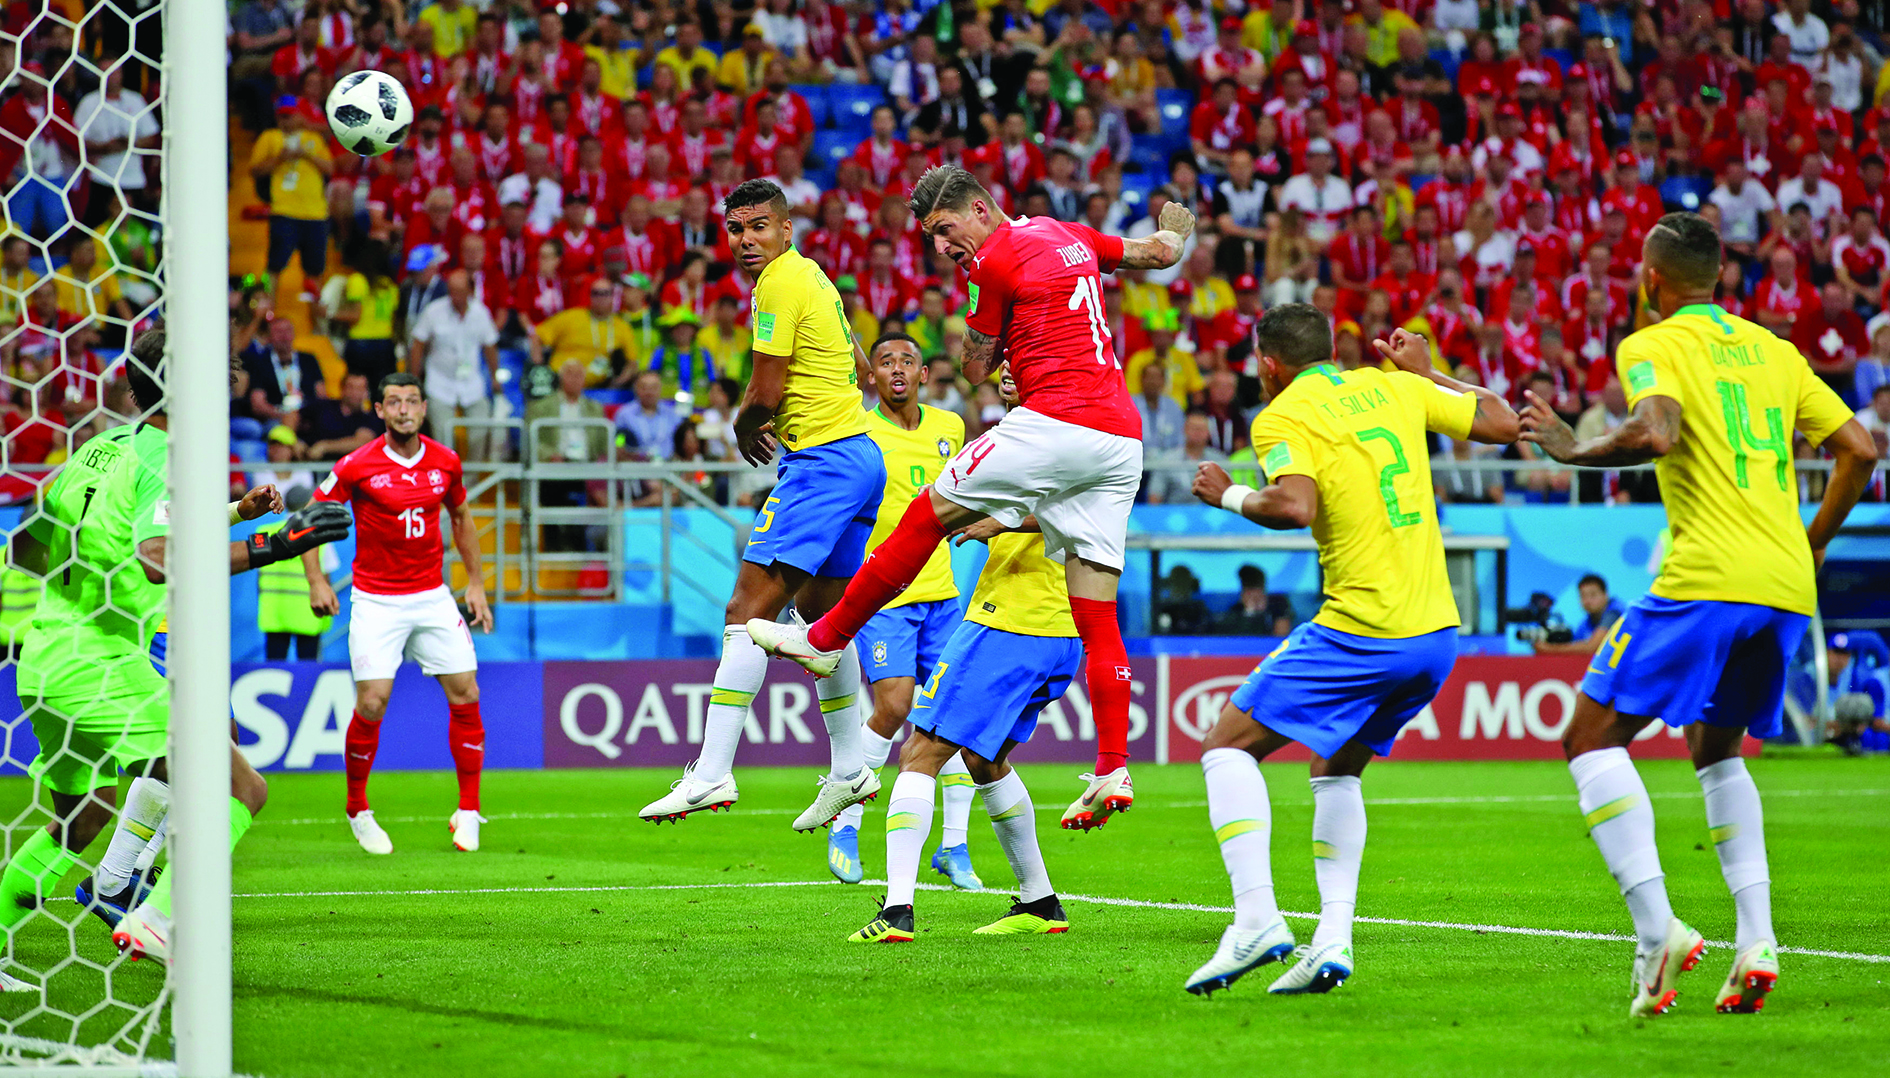 Brazil need solutions after coming unstuck against Swiss